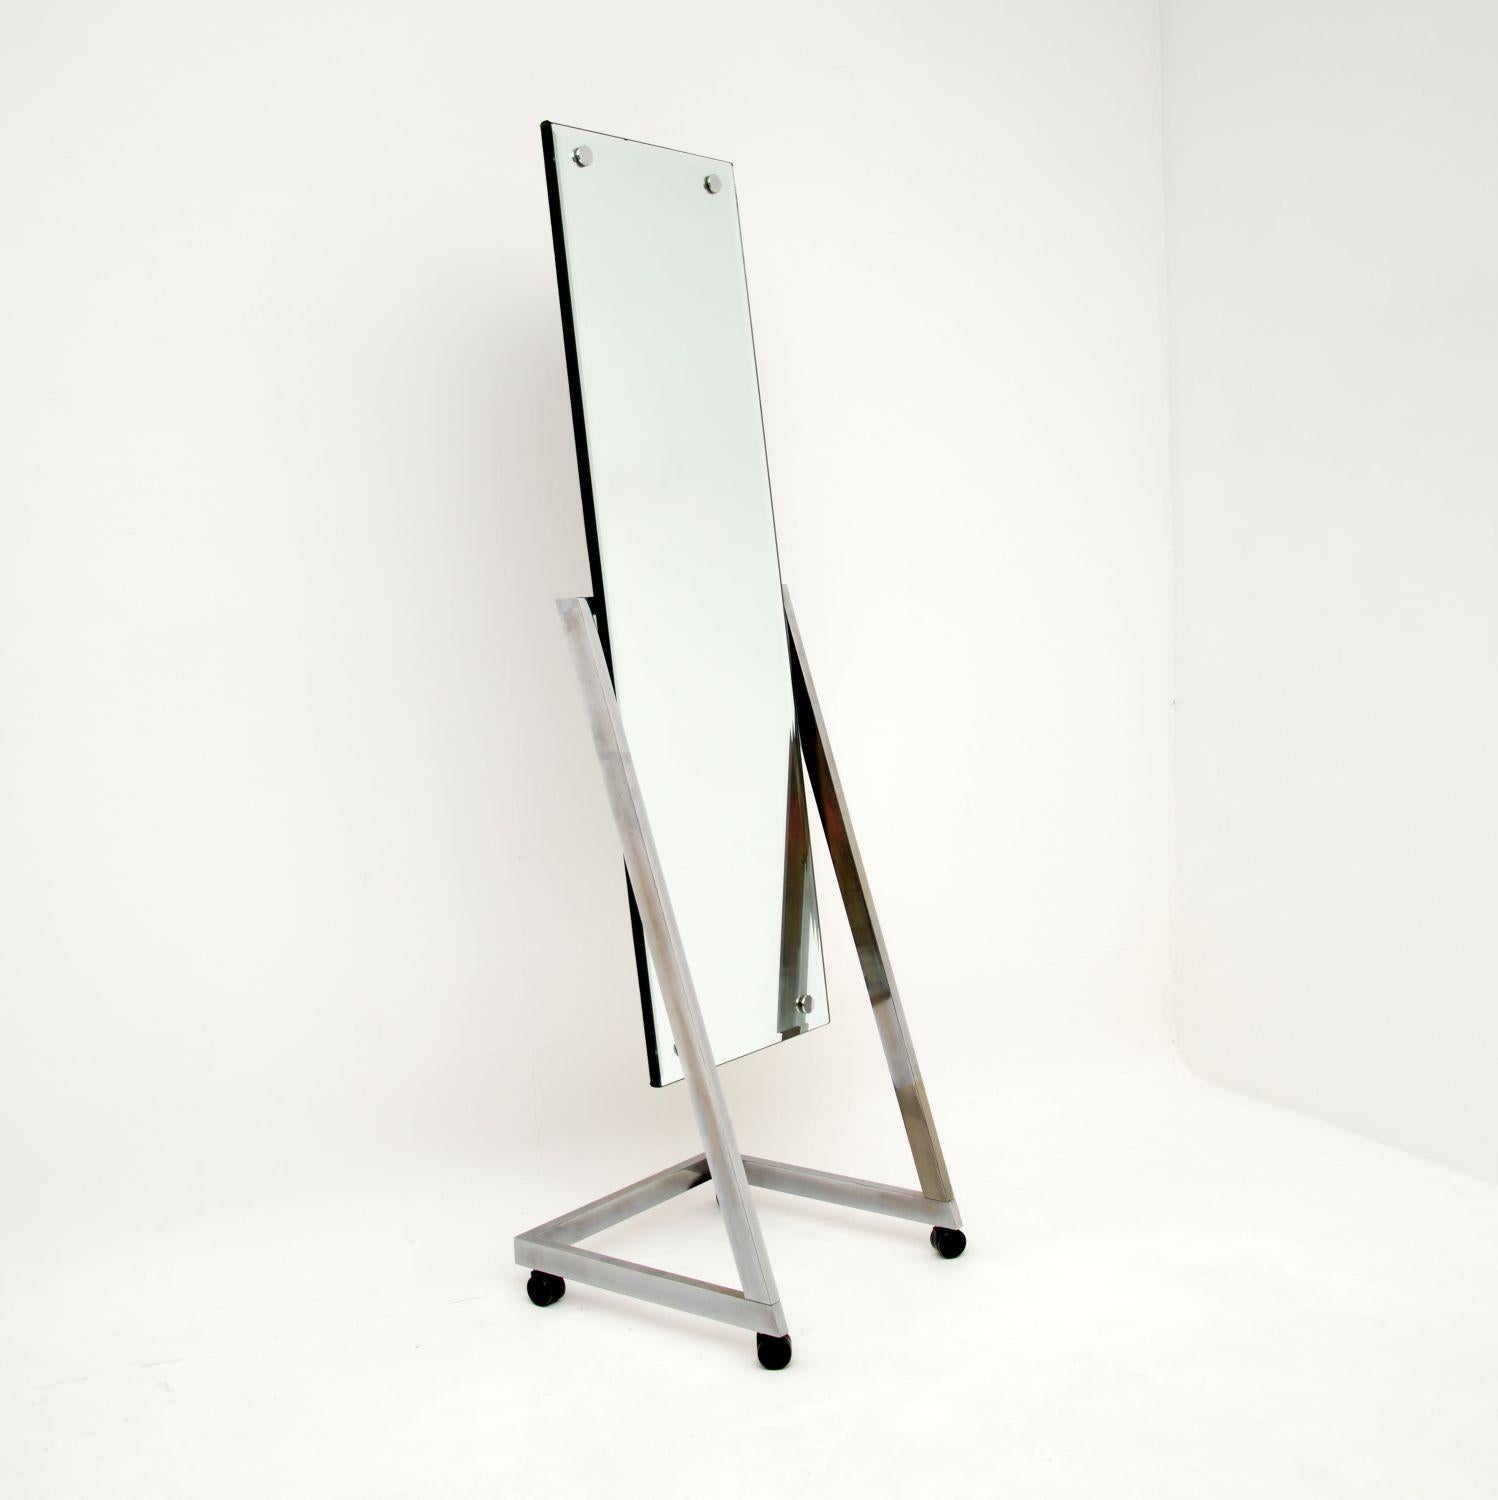 A very stylish and extremely well made vintage chrome floor mirror. This was made in England by Durlston designs, it dates from the 1970’s.

It is of superb quality and is a very useful item, it can tilt and roll smoothly on casters. The chrome